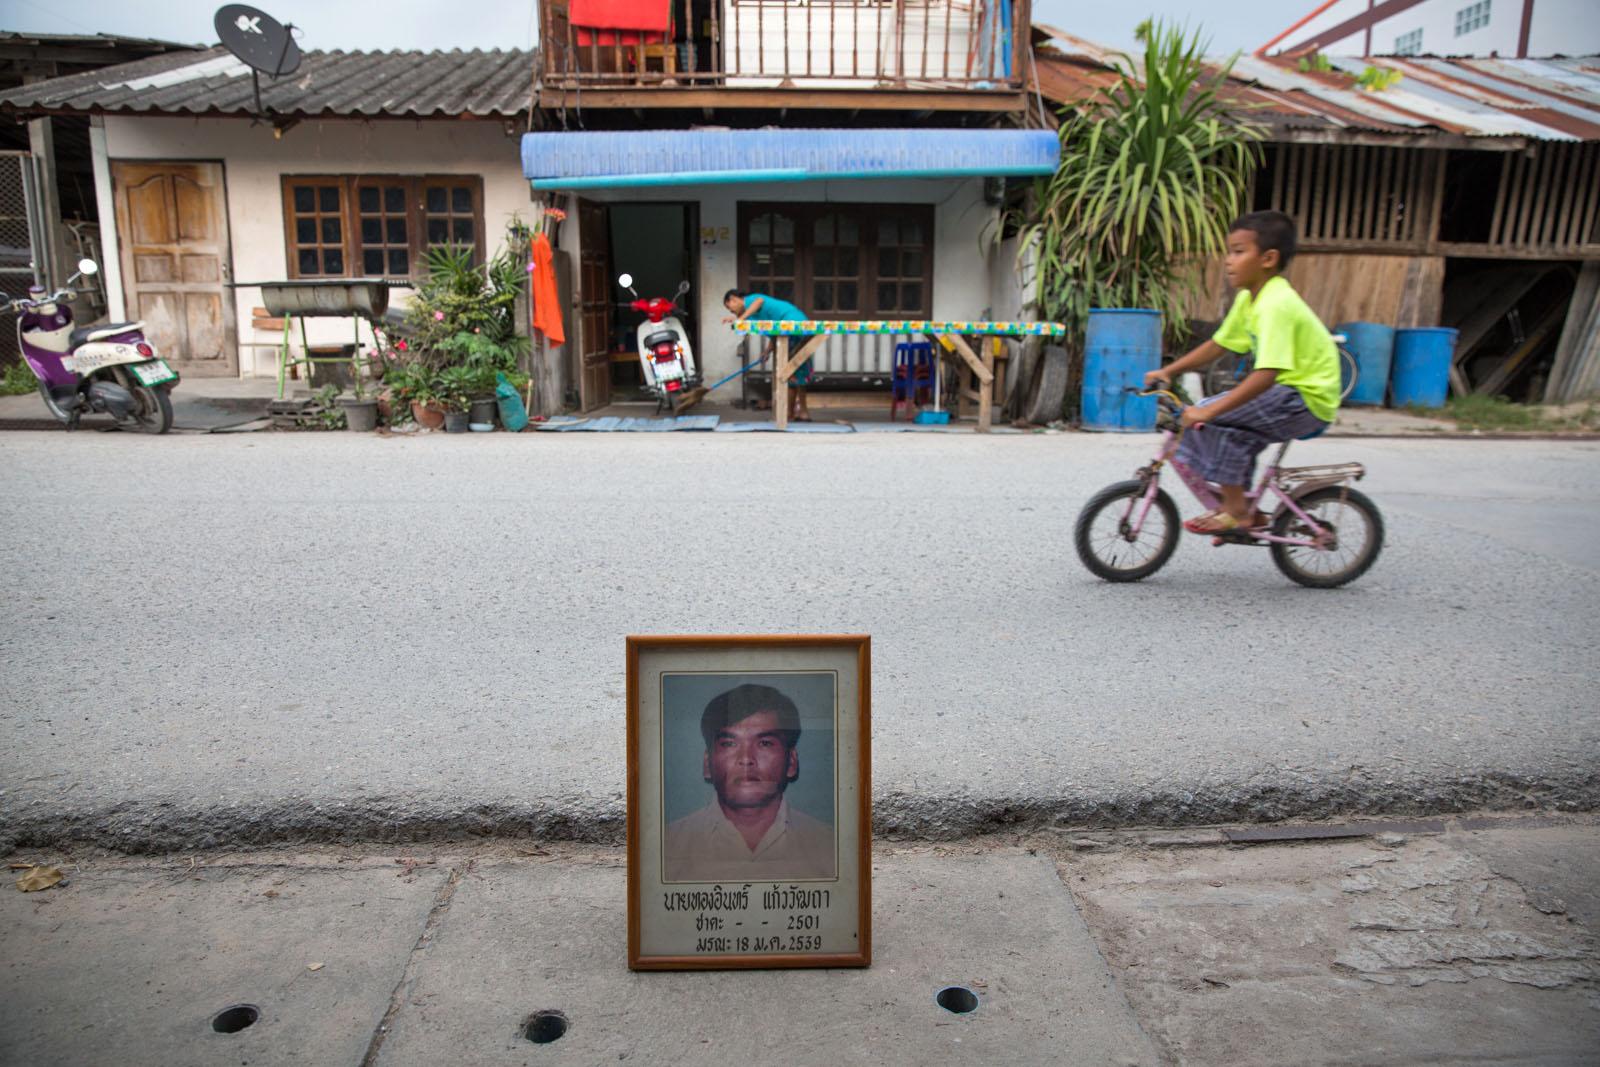 FOR THOSE WHO DIED TRYING - Thong-in Kaewwattha, was shot dead on 18 January 1996. He...